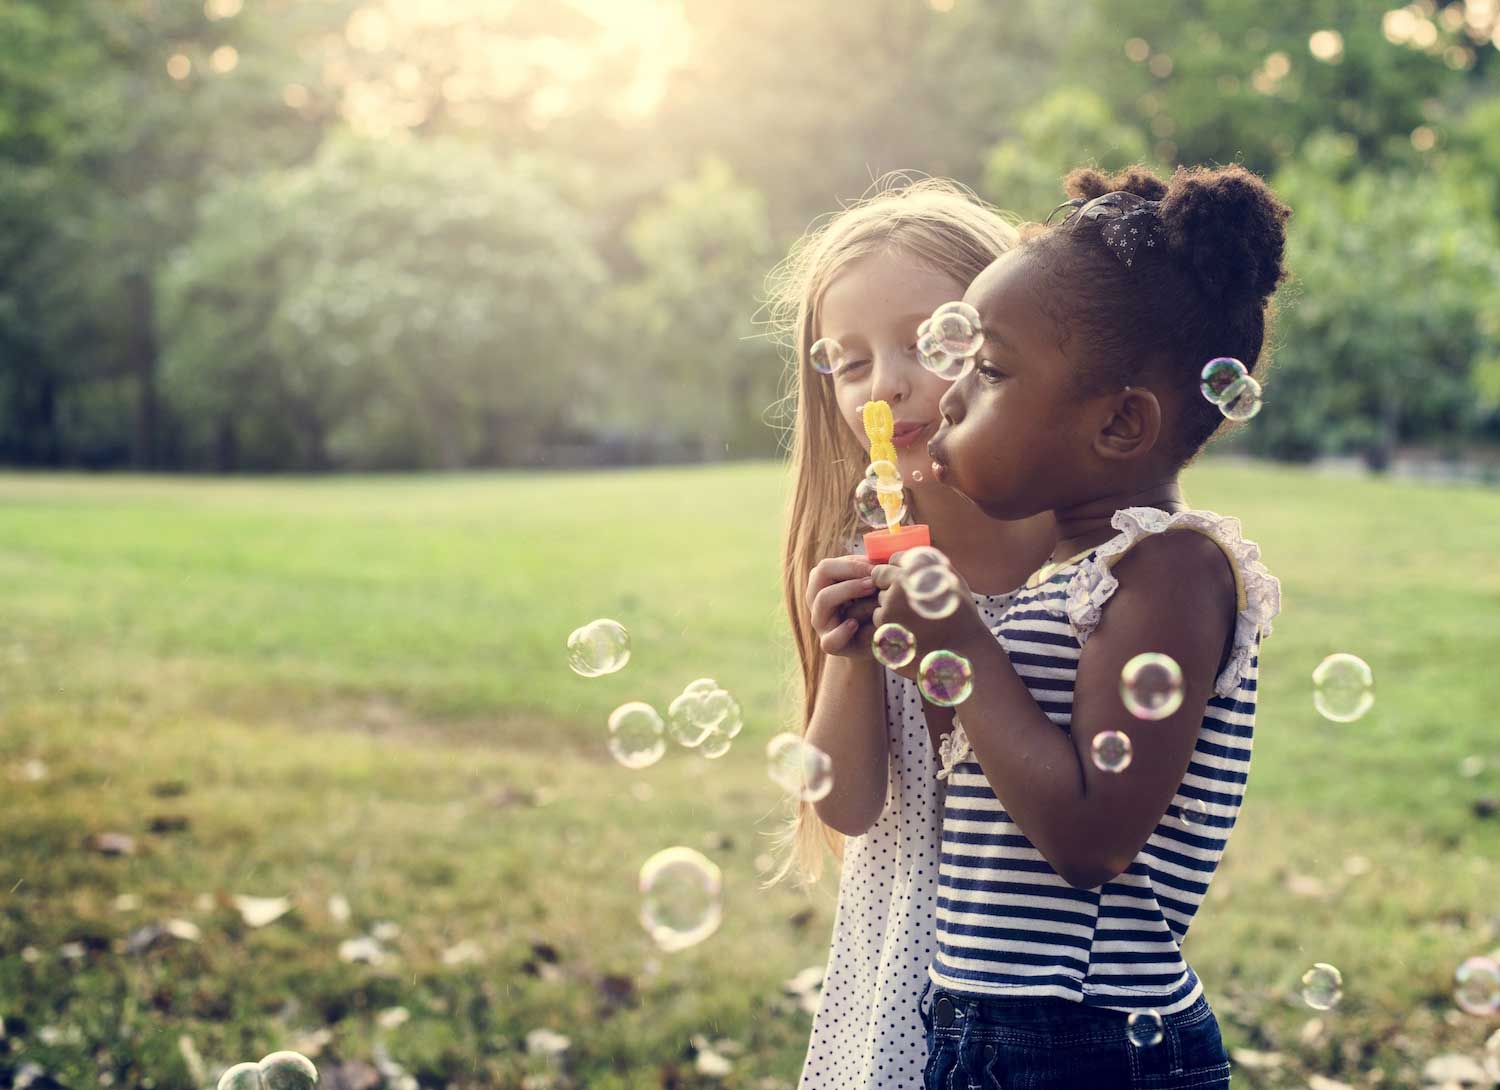 Two girls standing in the grass blowing bubbles.